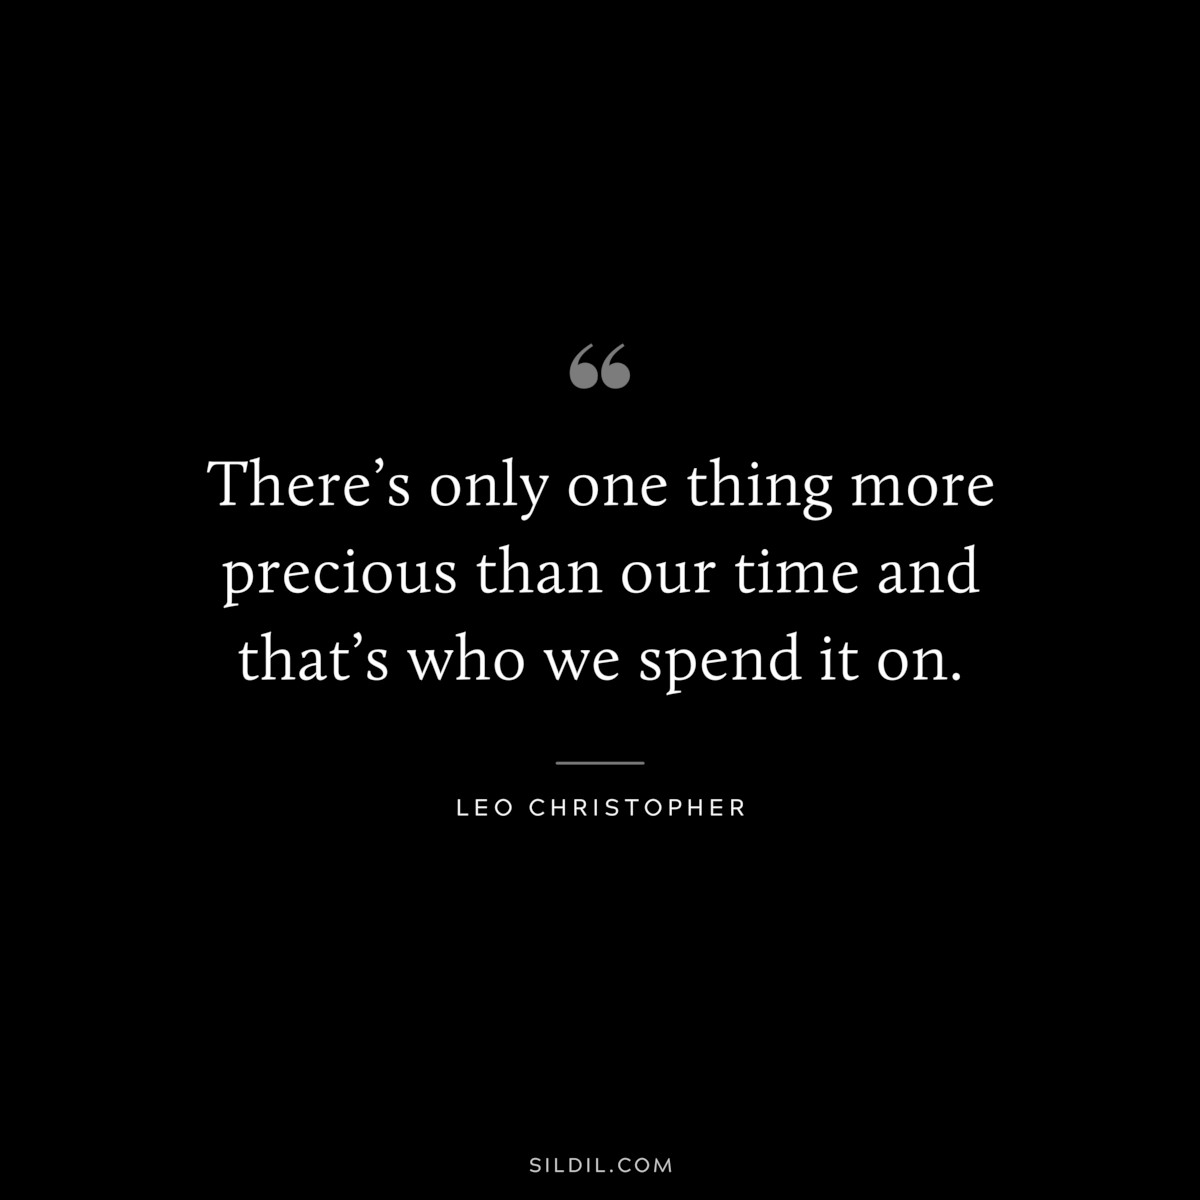 There’s only one thing more precious than our time and that’s who we spend it on. ― Leo Christopher